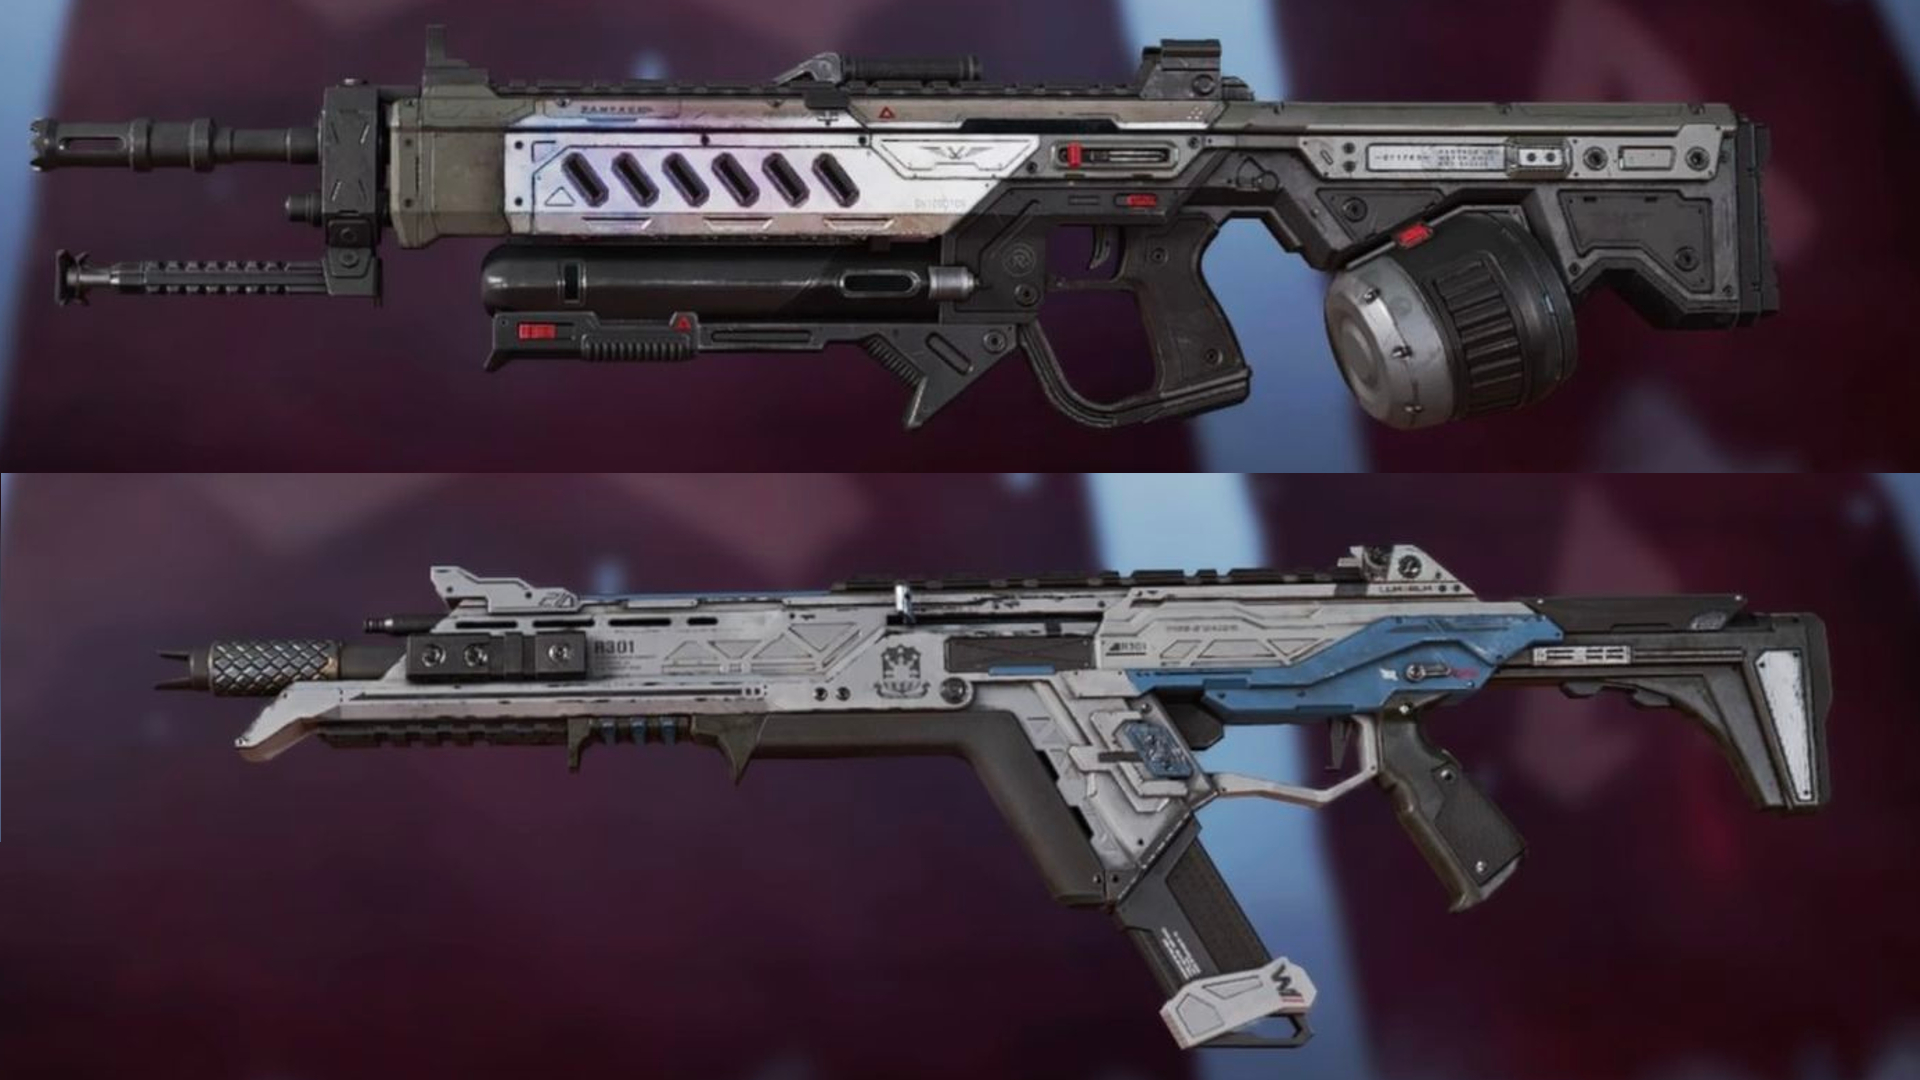 Apex Legends News R 301 And Rampage Lmg Will Be Available In Replicators In Apex Legends Season 13 T Co 2tfld6ojxg Twitter